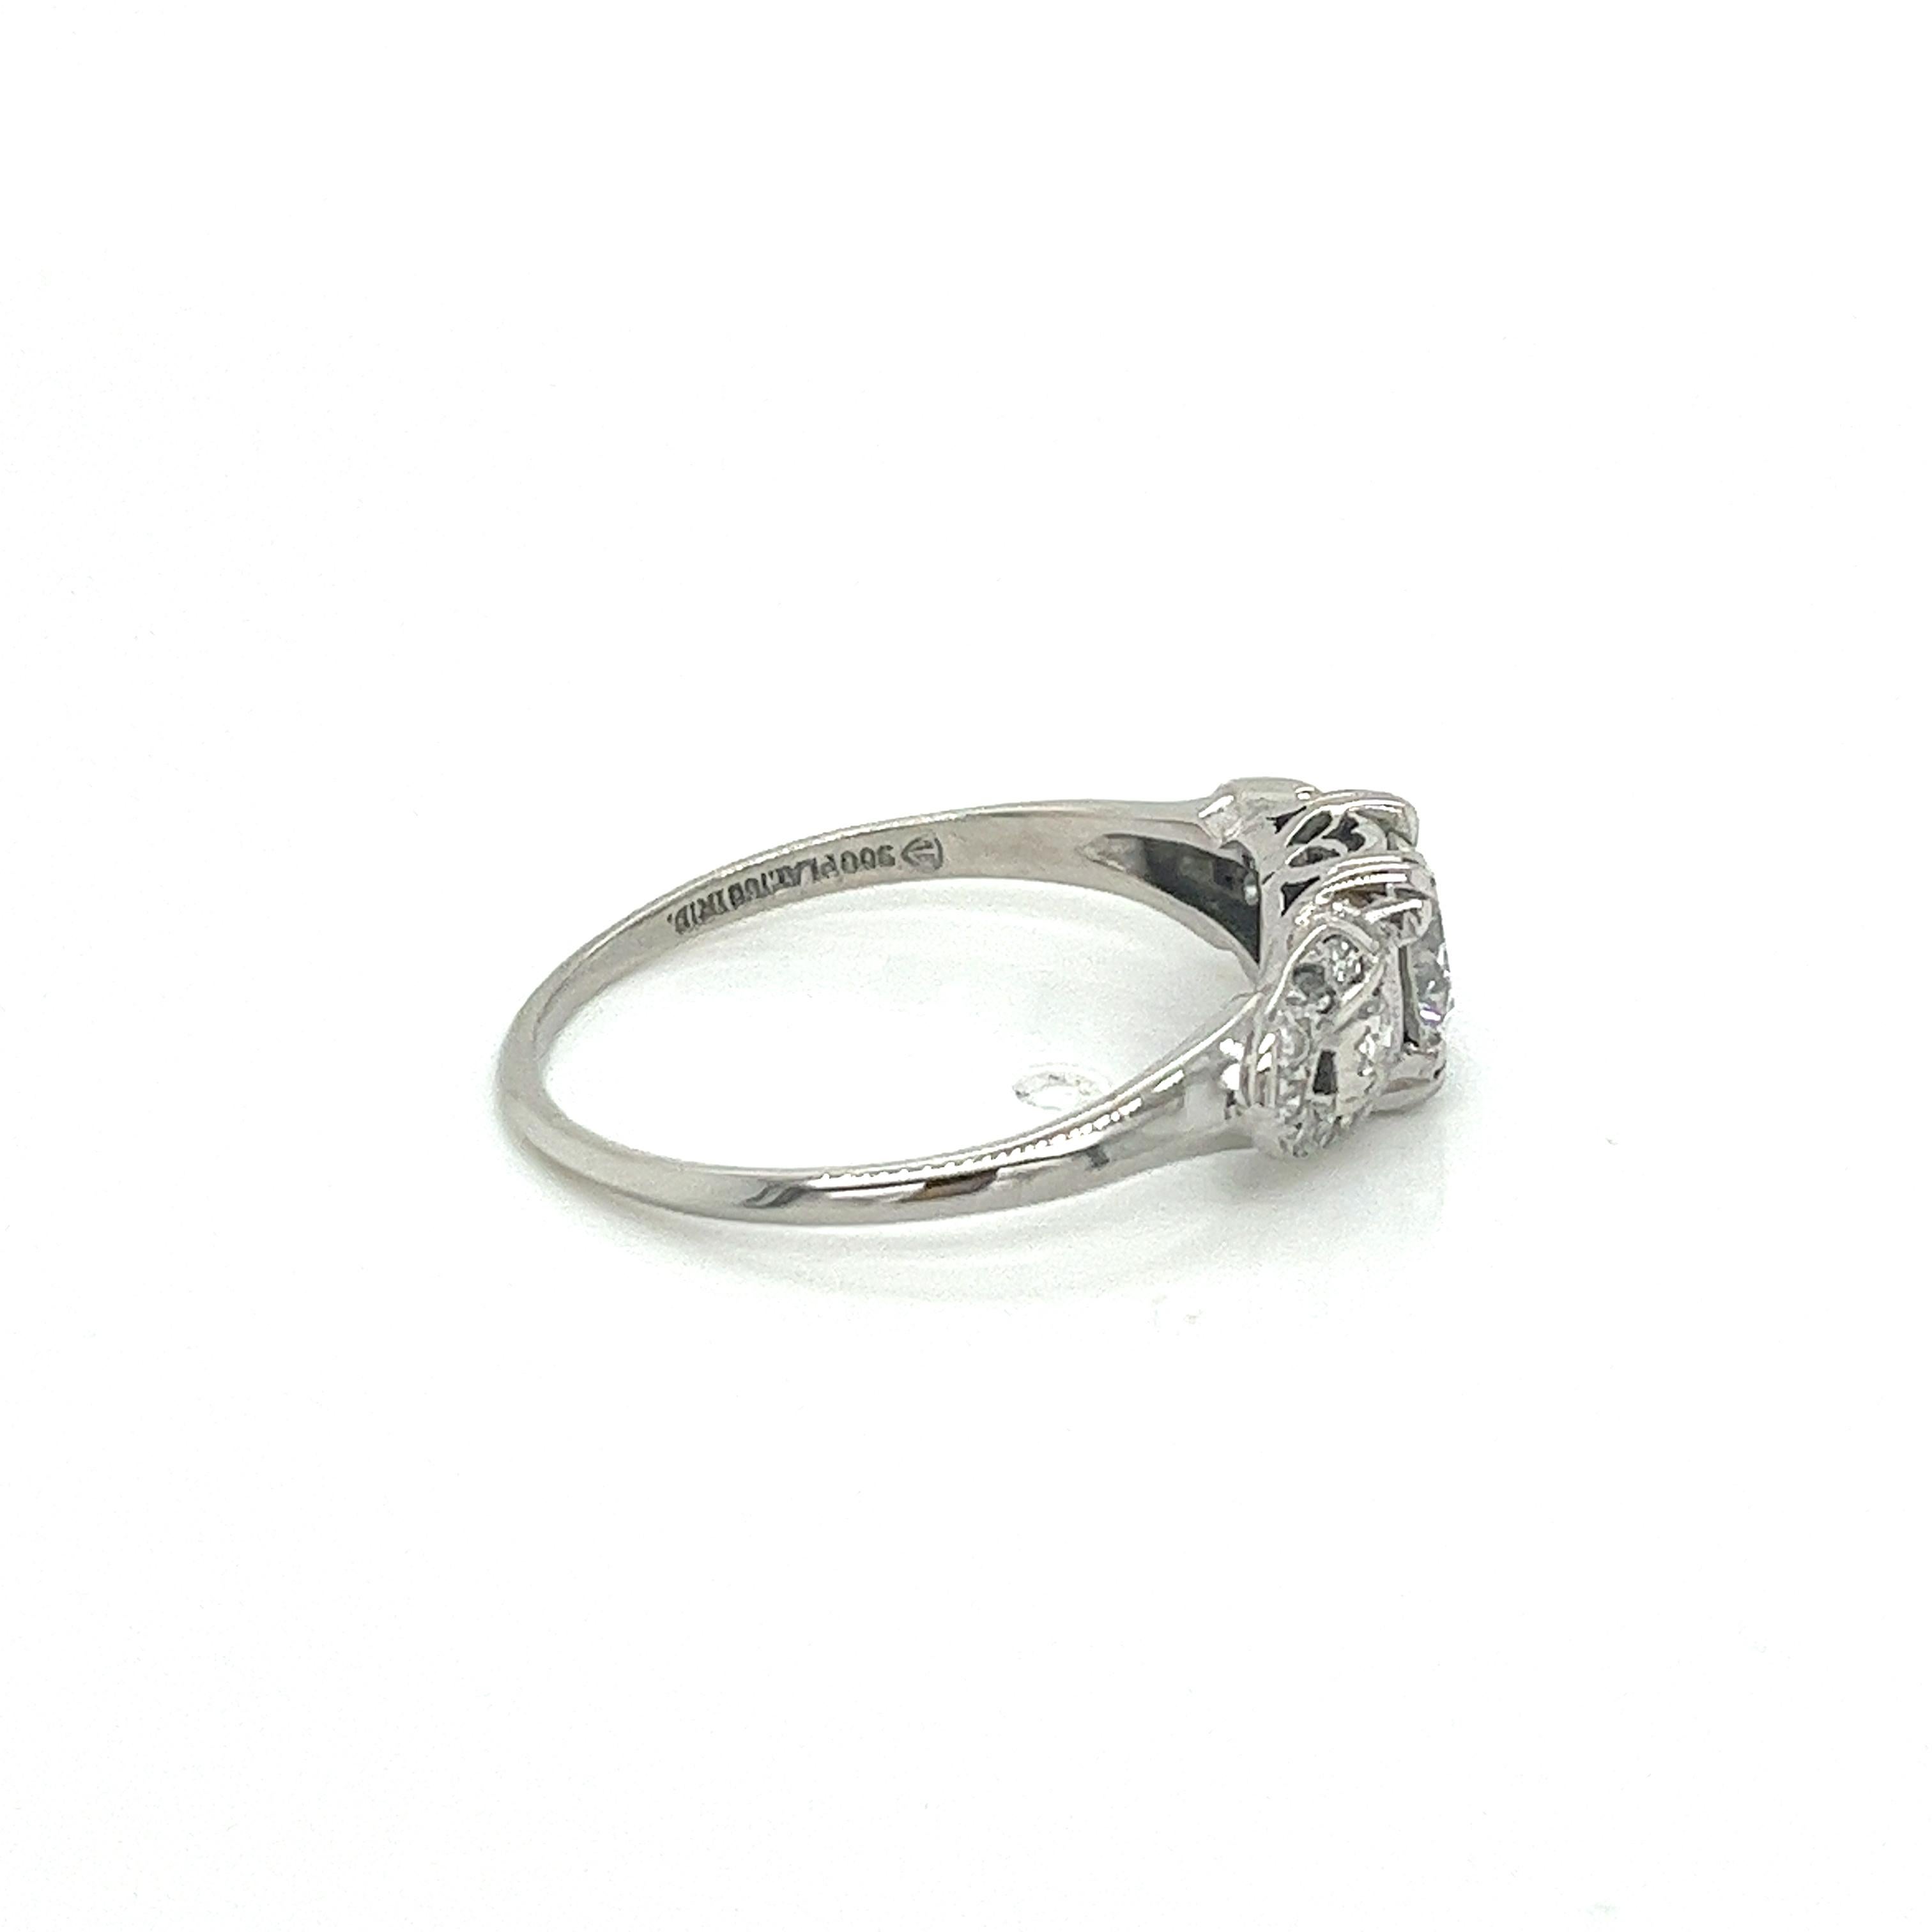 Vintage 1930s Art Deco Platinum Diamond Engagement Ring .65ct In Good Condition For Sale In Boston, MA